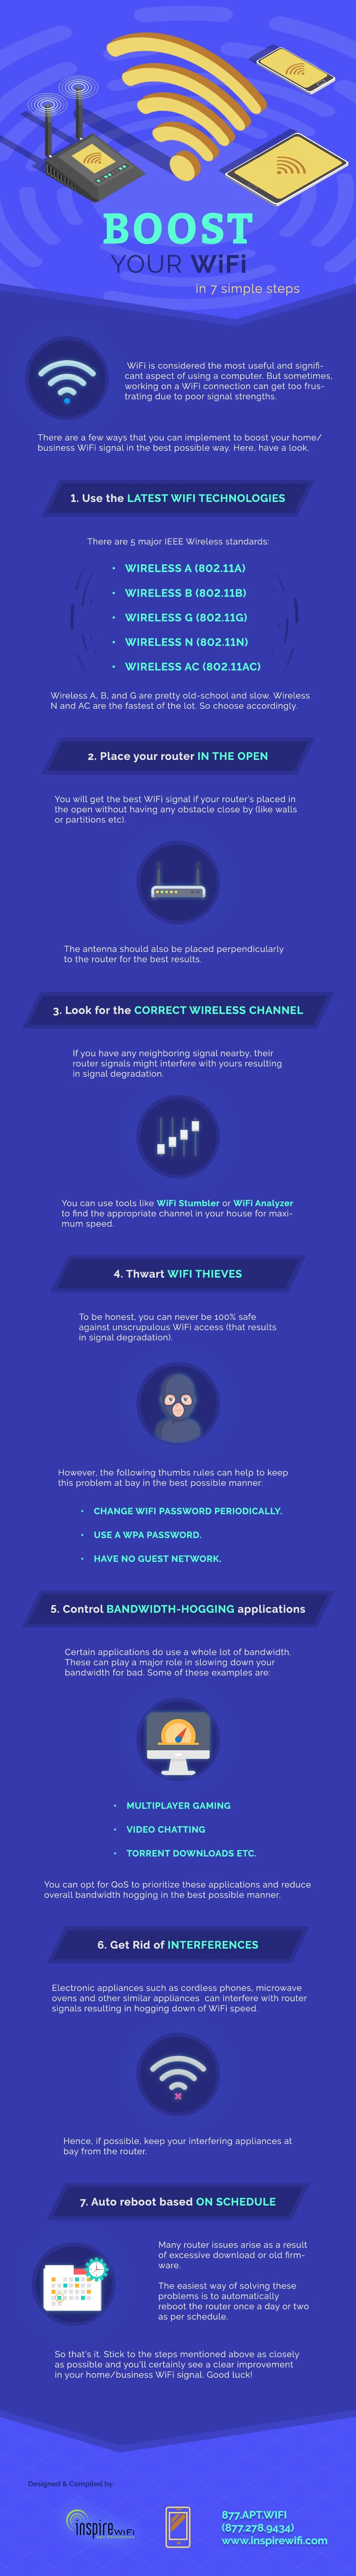 7 Simple Steps To Boost Your WiFi - #Infographic